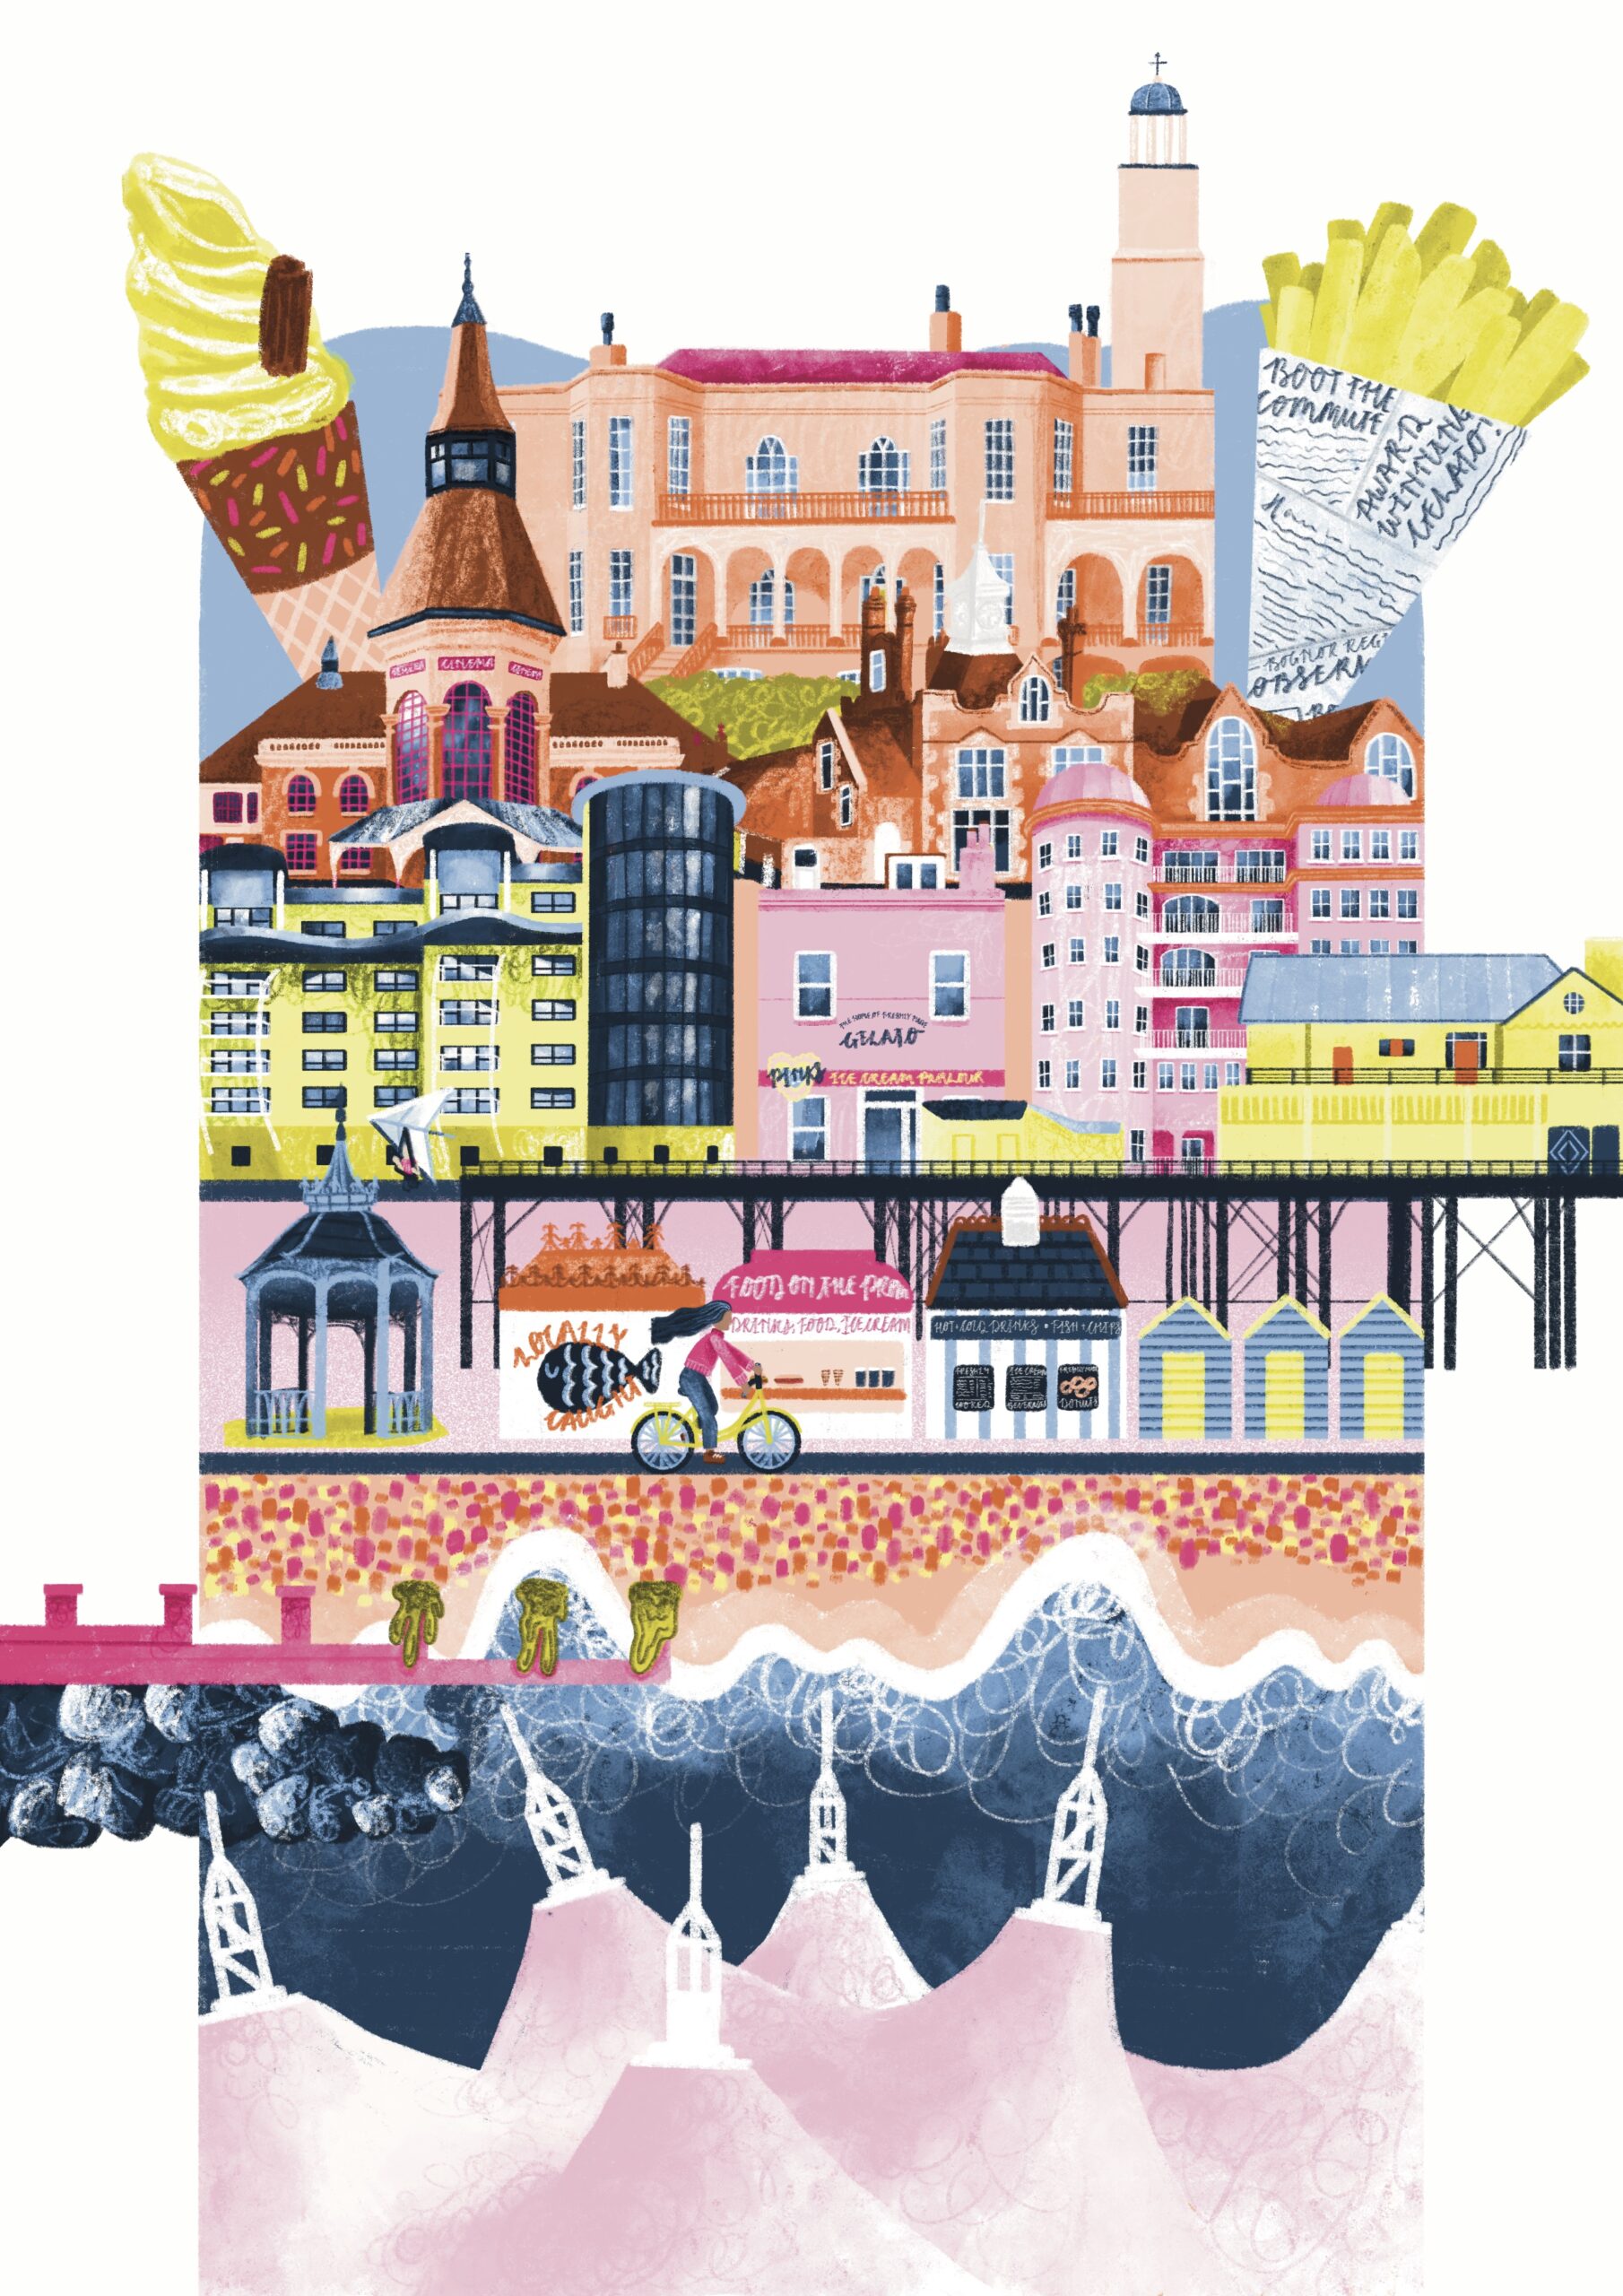 An bright coloured illustration inspired by some of Bognor Regis' finest buildings and businesses - lots of pinks, oranges and lime greens!